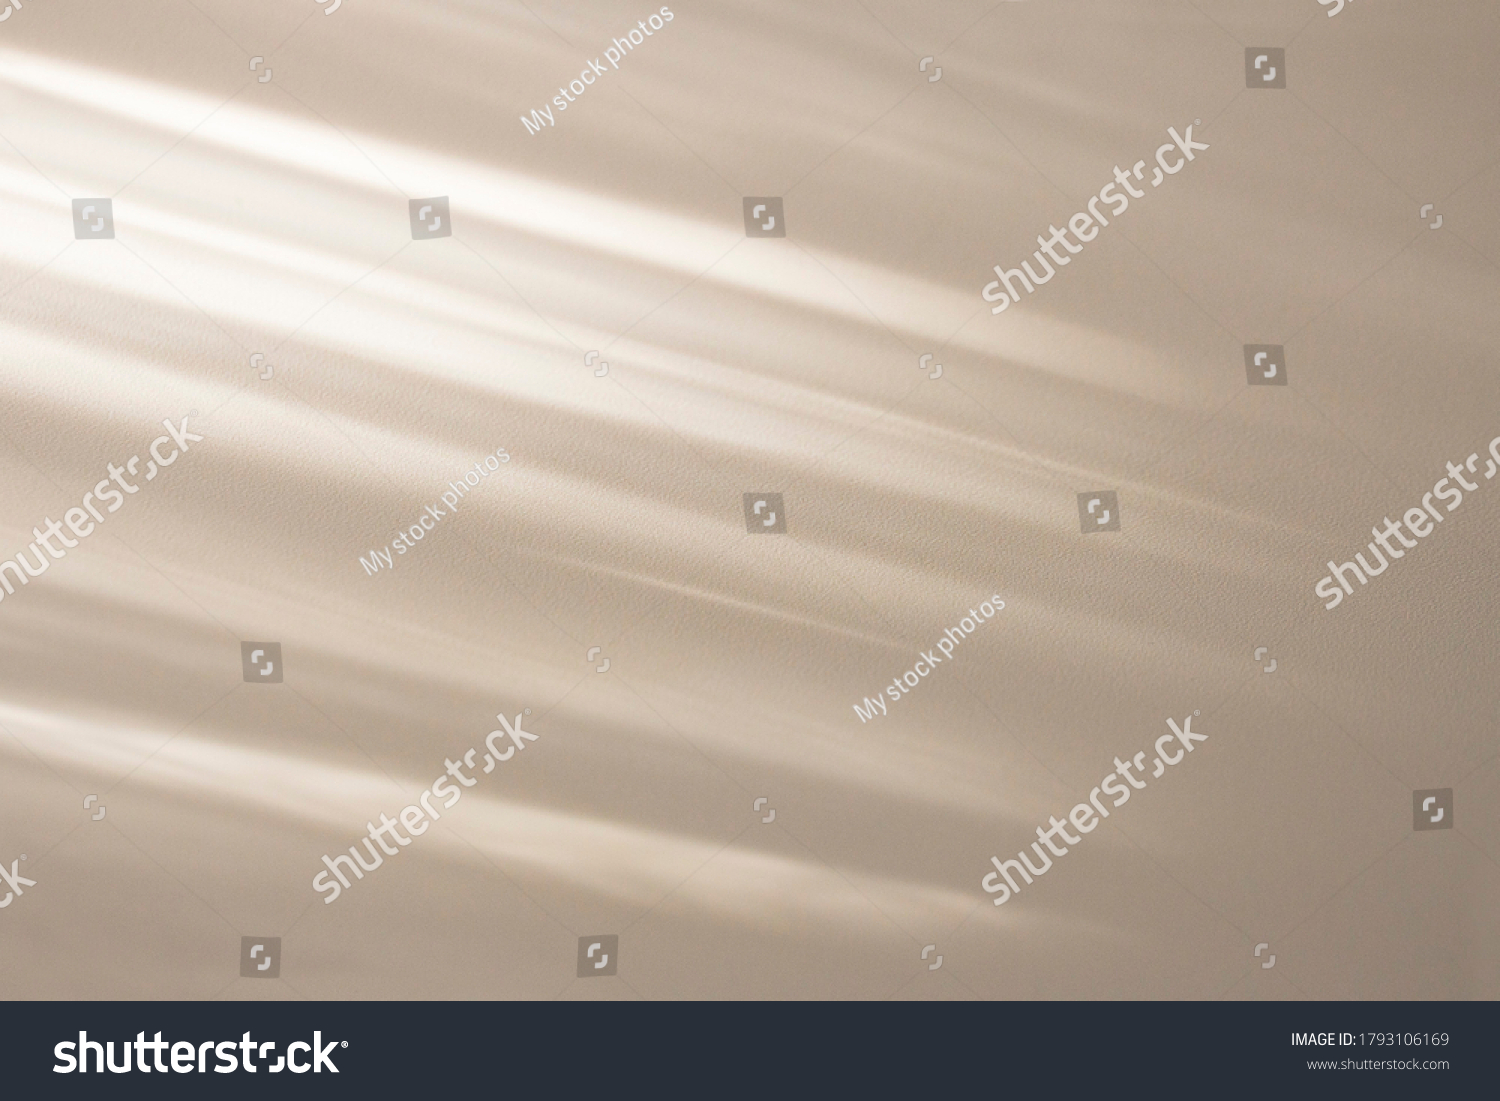 Top view of beige light bokeh shadow on sand color background. Flat lay with shadow on the wall. Minimal summer concept. Creative copyspace for overlay on product presentation, backdrop and mockup. #1793106169